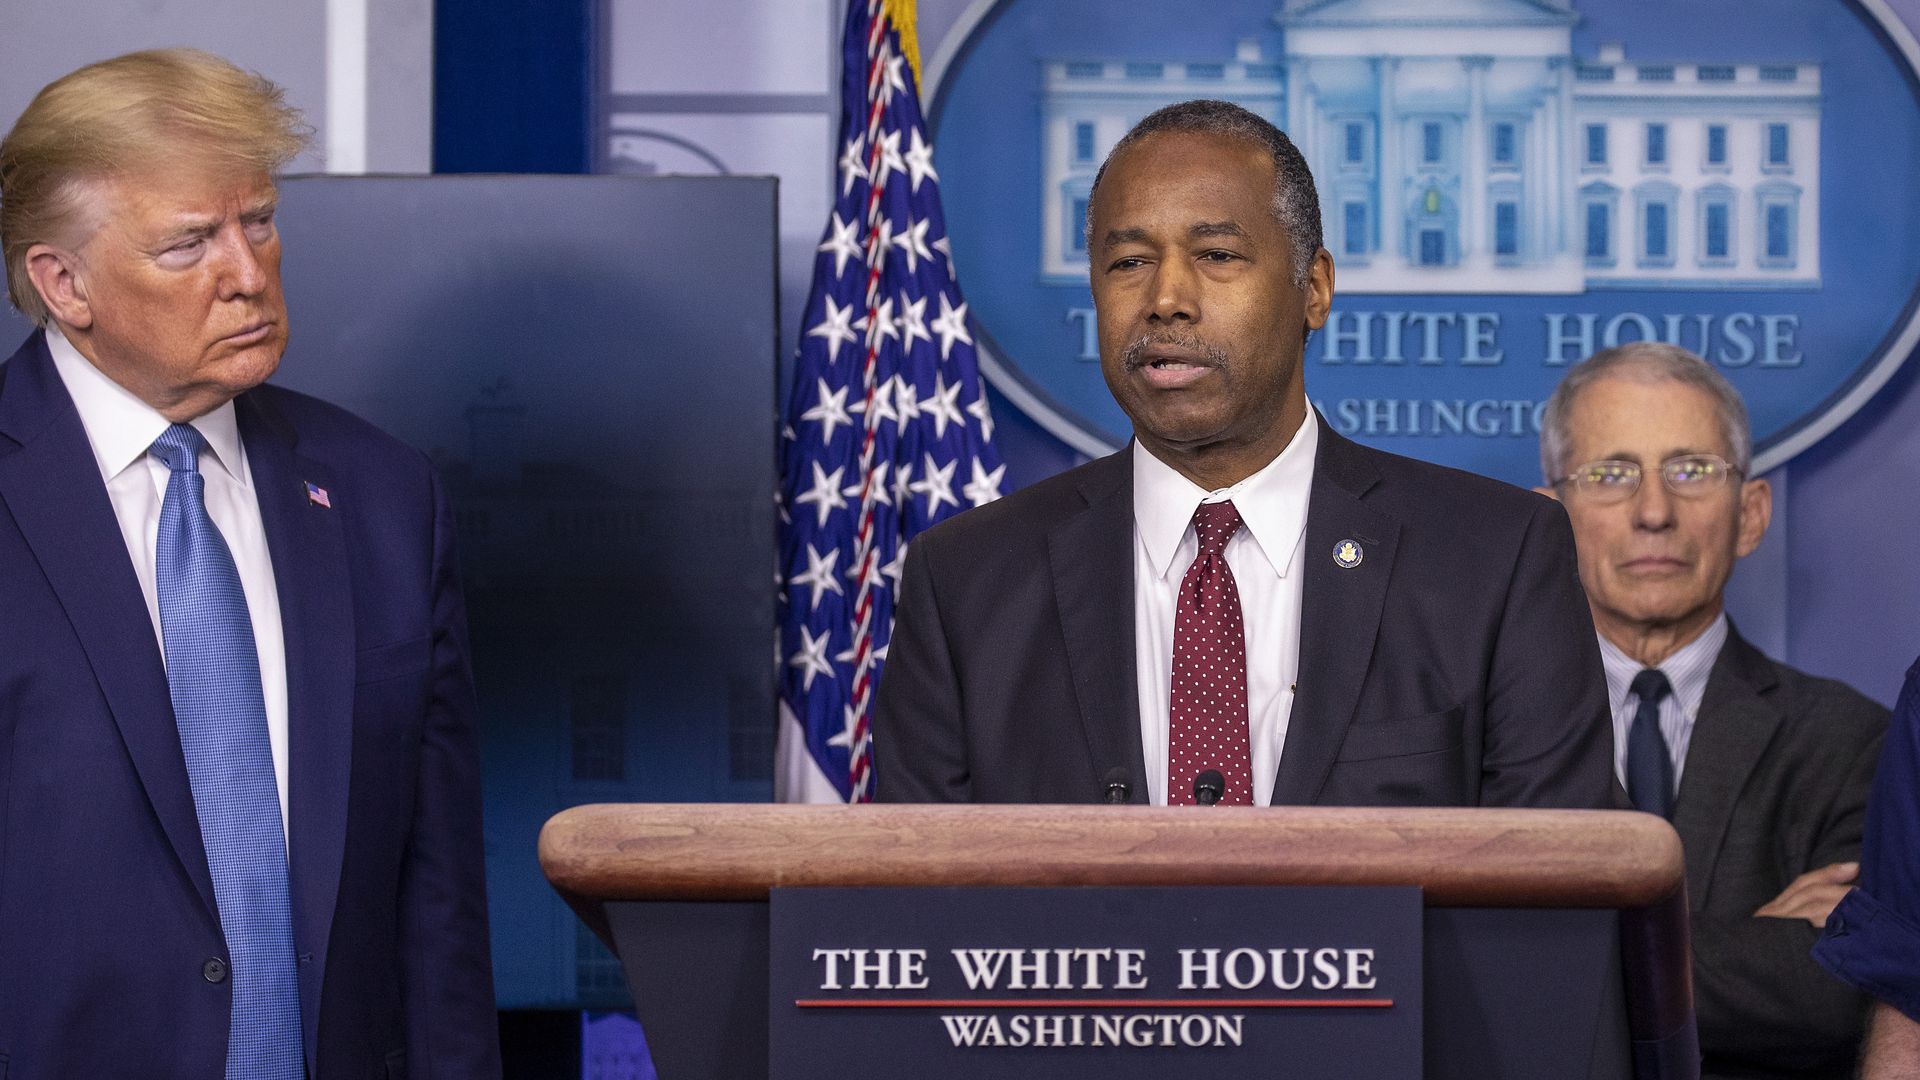 Ben Carson is seen speaking alongside President Trump and Dr. Anthony Fauci during a White House coronavirus briefing.